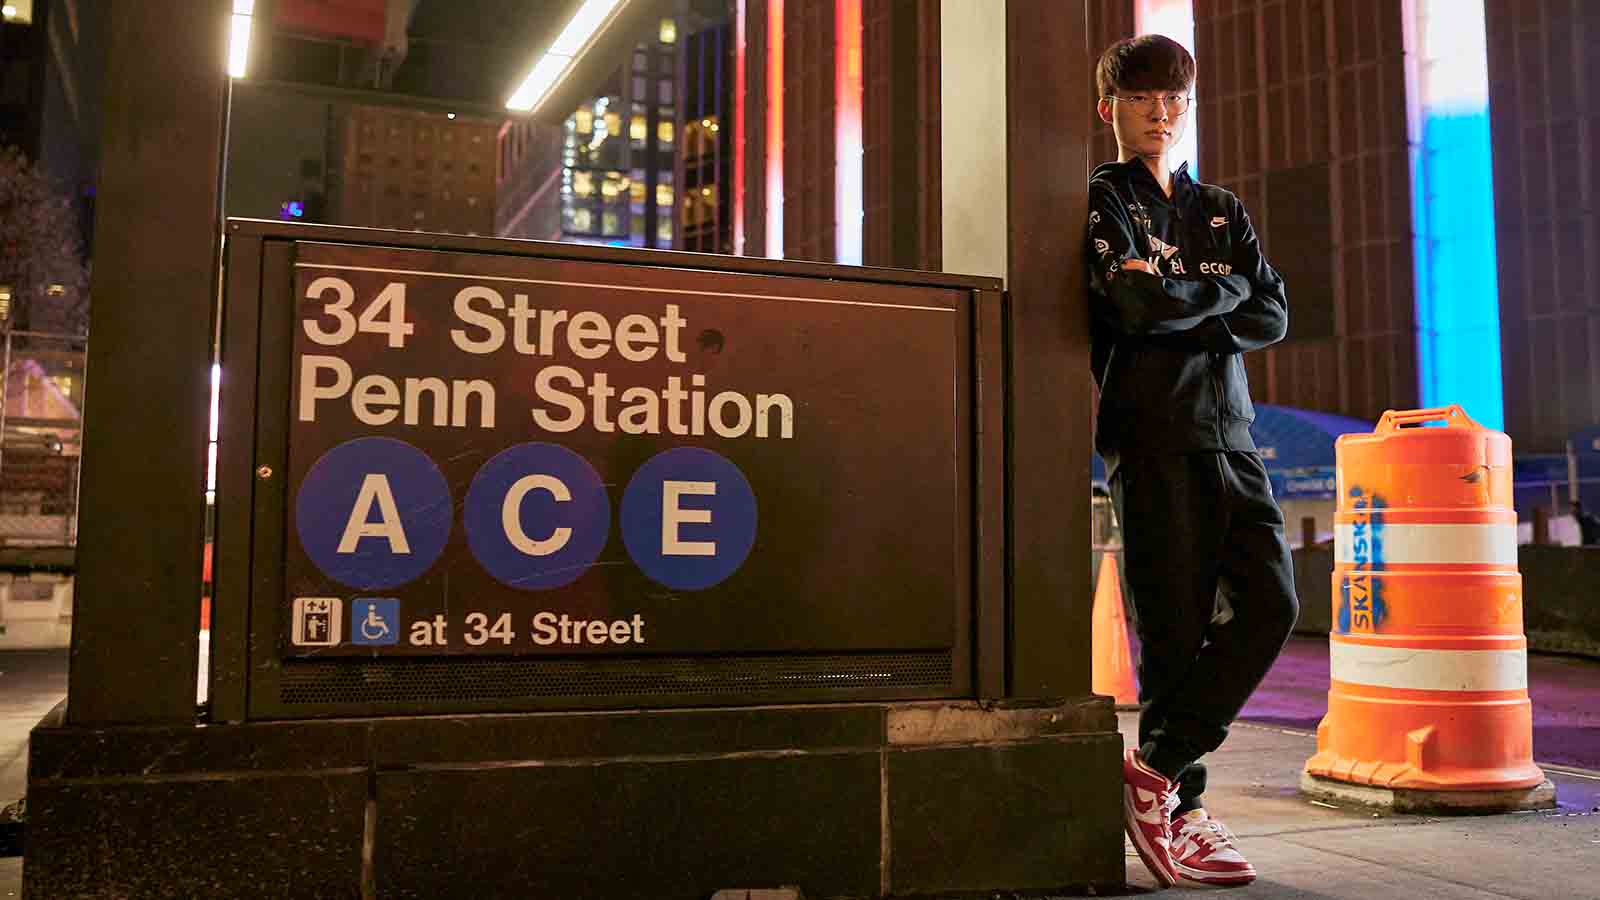 League of Legends fans celebrate Faker's birthday with Times Square  billboard - Dexerto